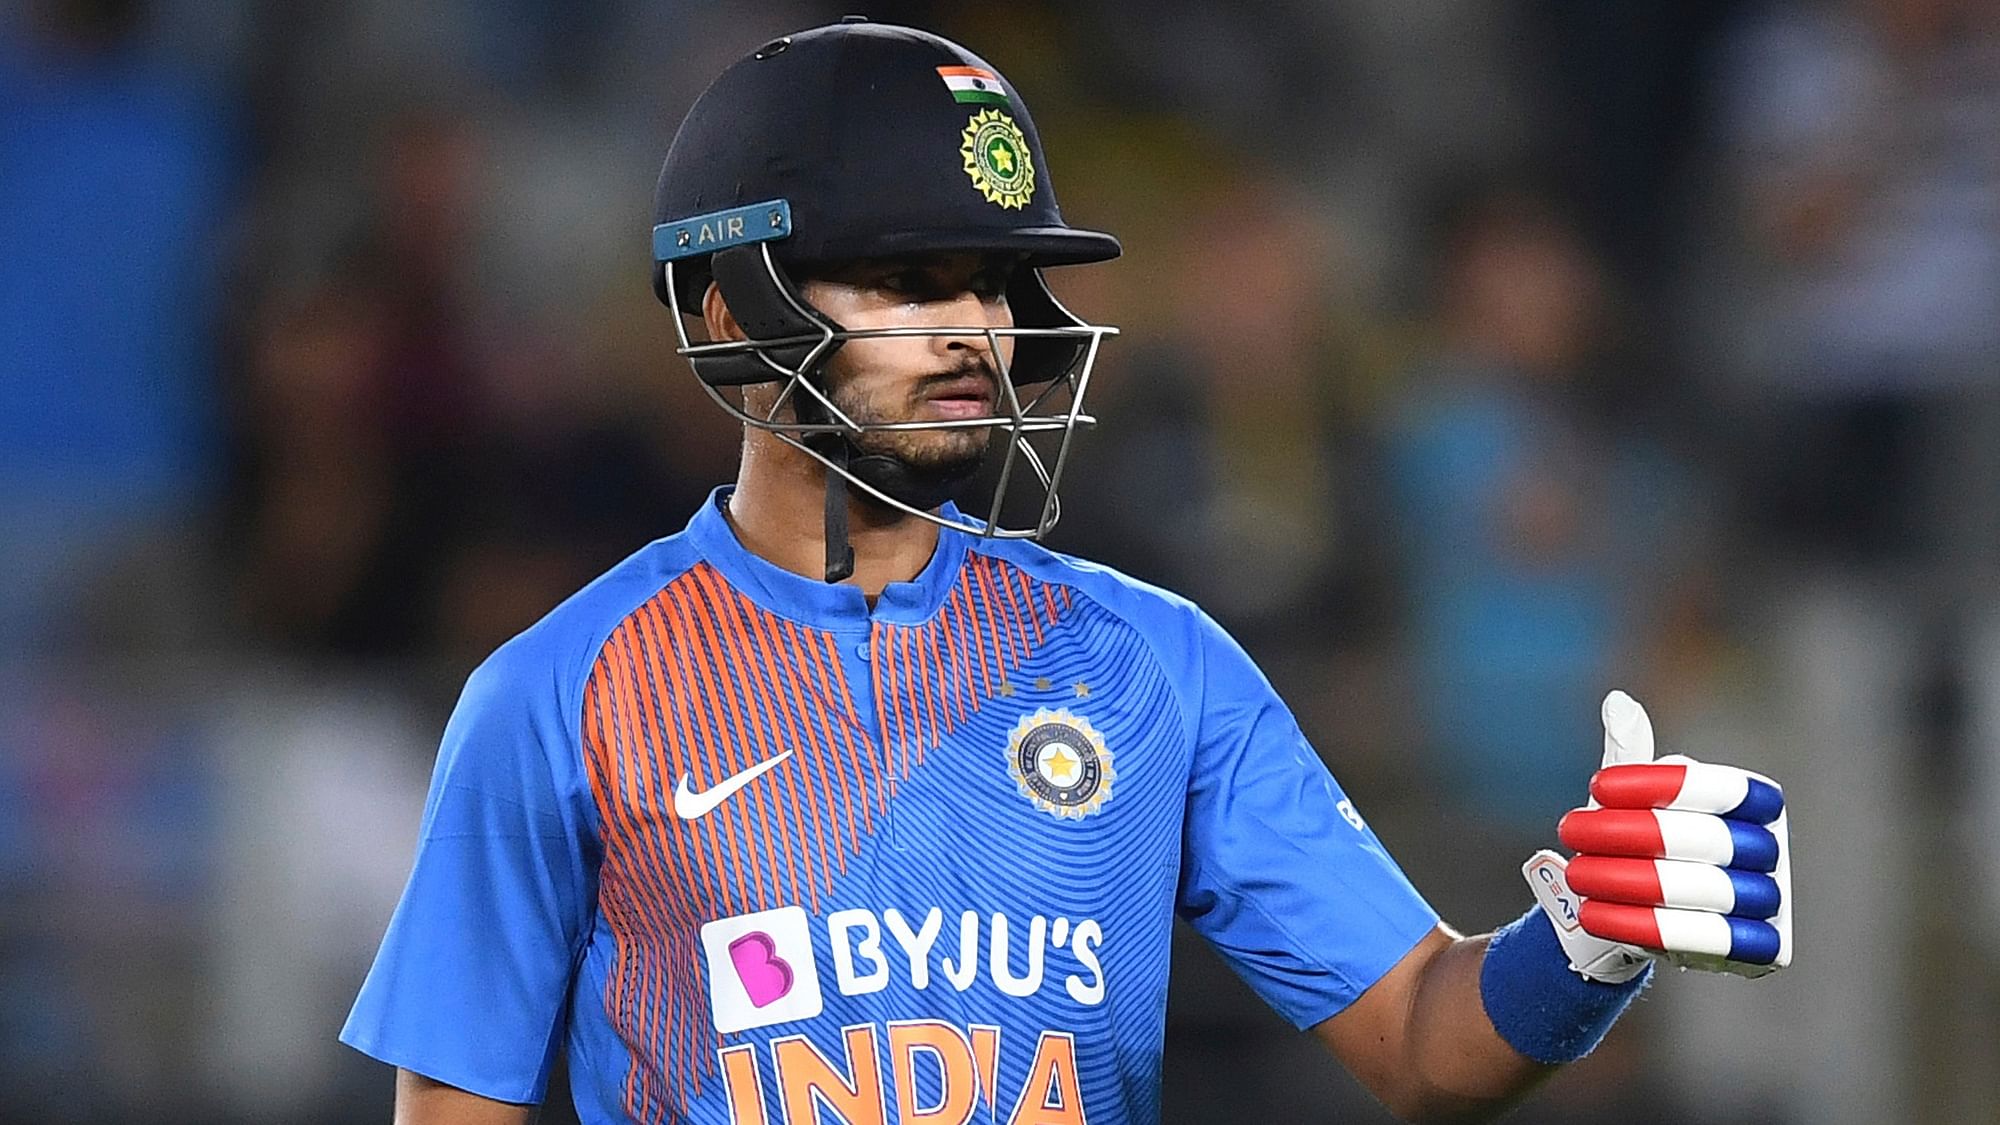 Members of the cricketing fraternity and fans took to twitter to praise Shreyas Iyer and congratulate the Indian team for the win.